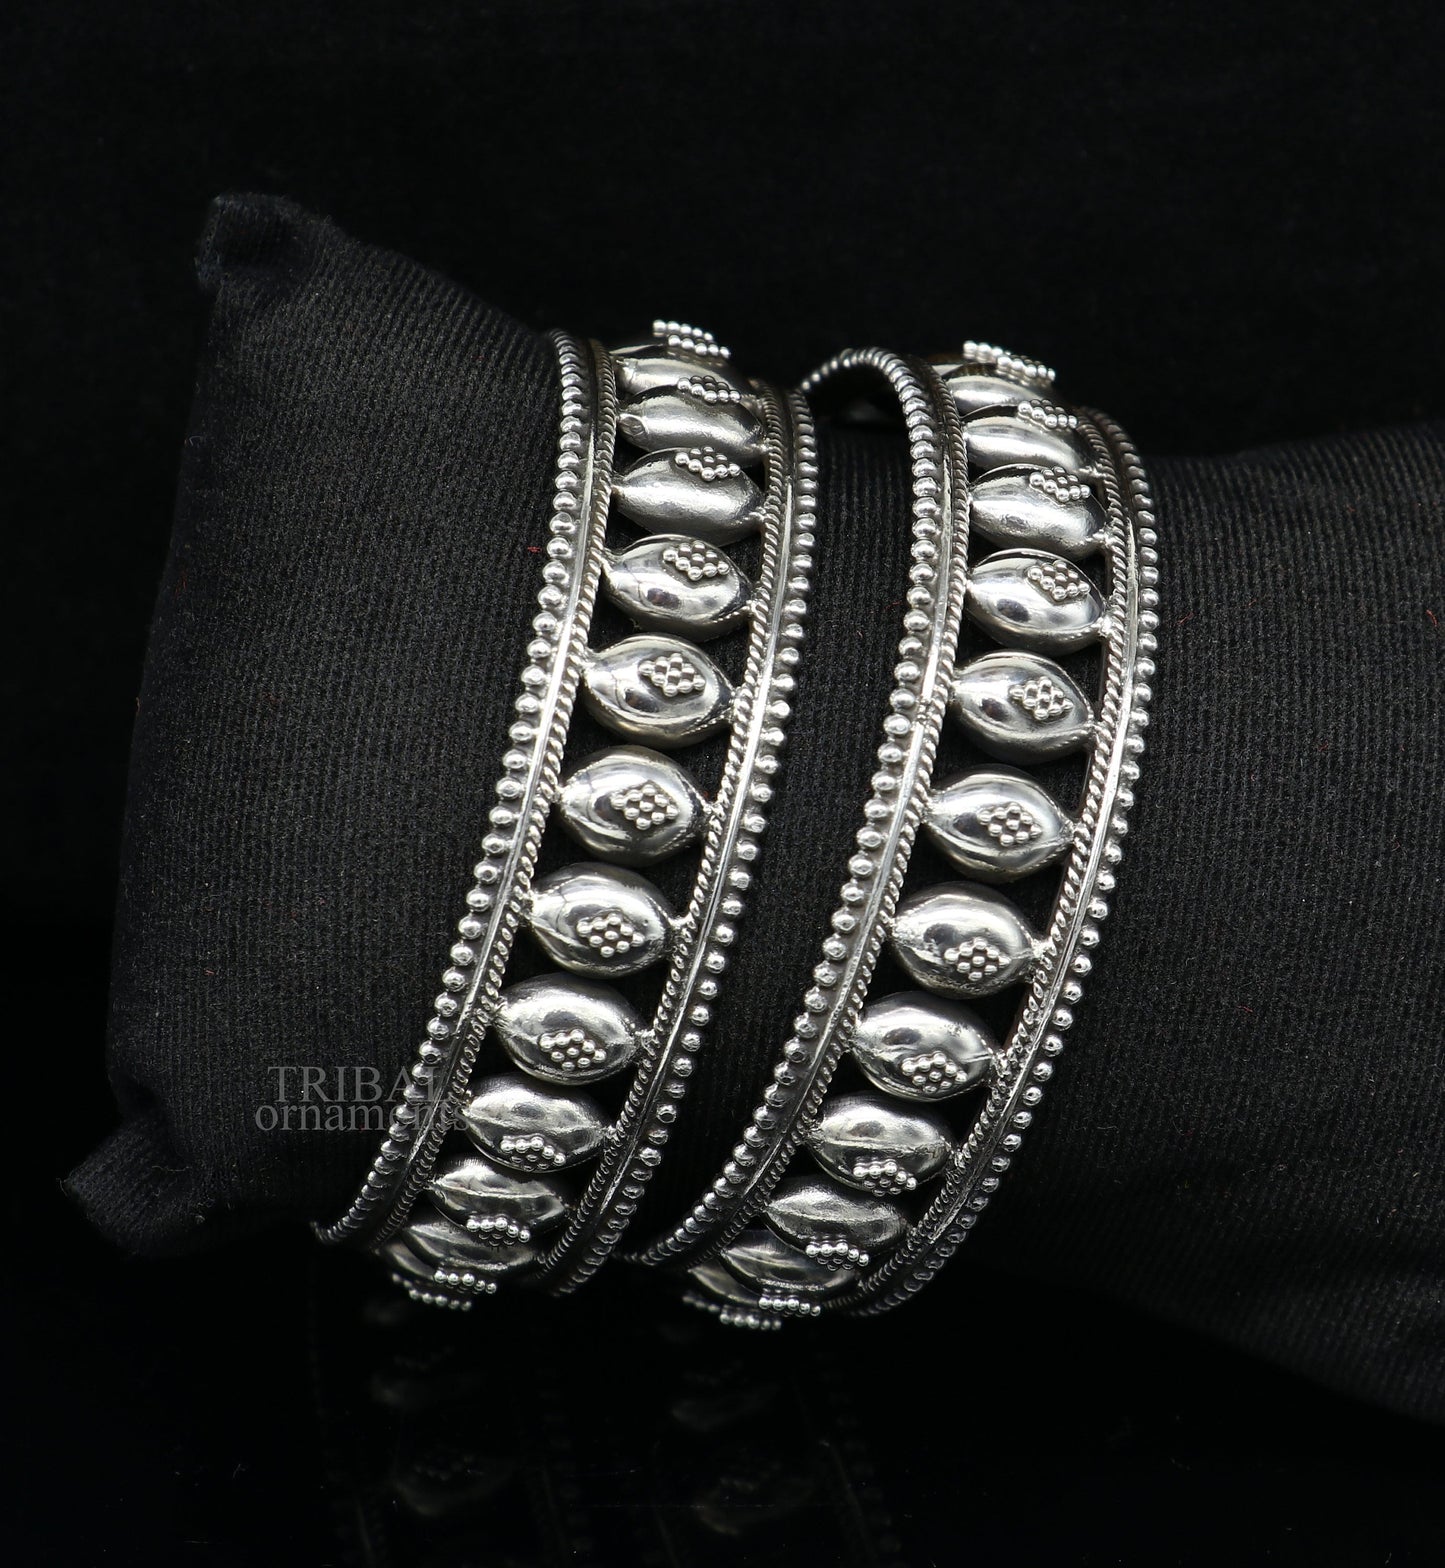 925 sterling silver handmade Gorgeous Vintage floral design bangle bracelet tribal ethnic jewelry best bride gifting jewelry nba313 - TRIBAL ORNAMENTS